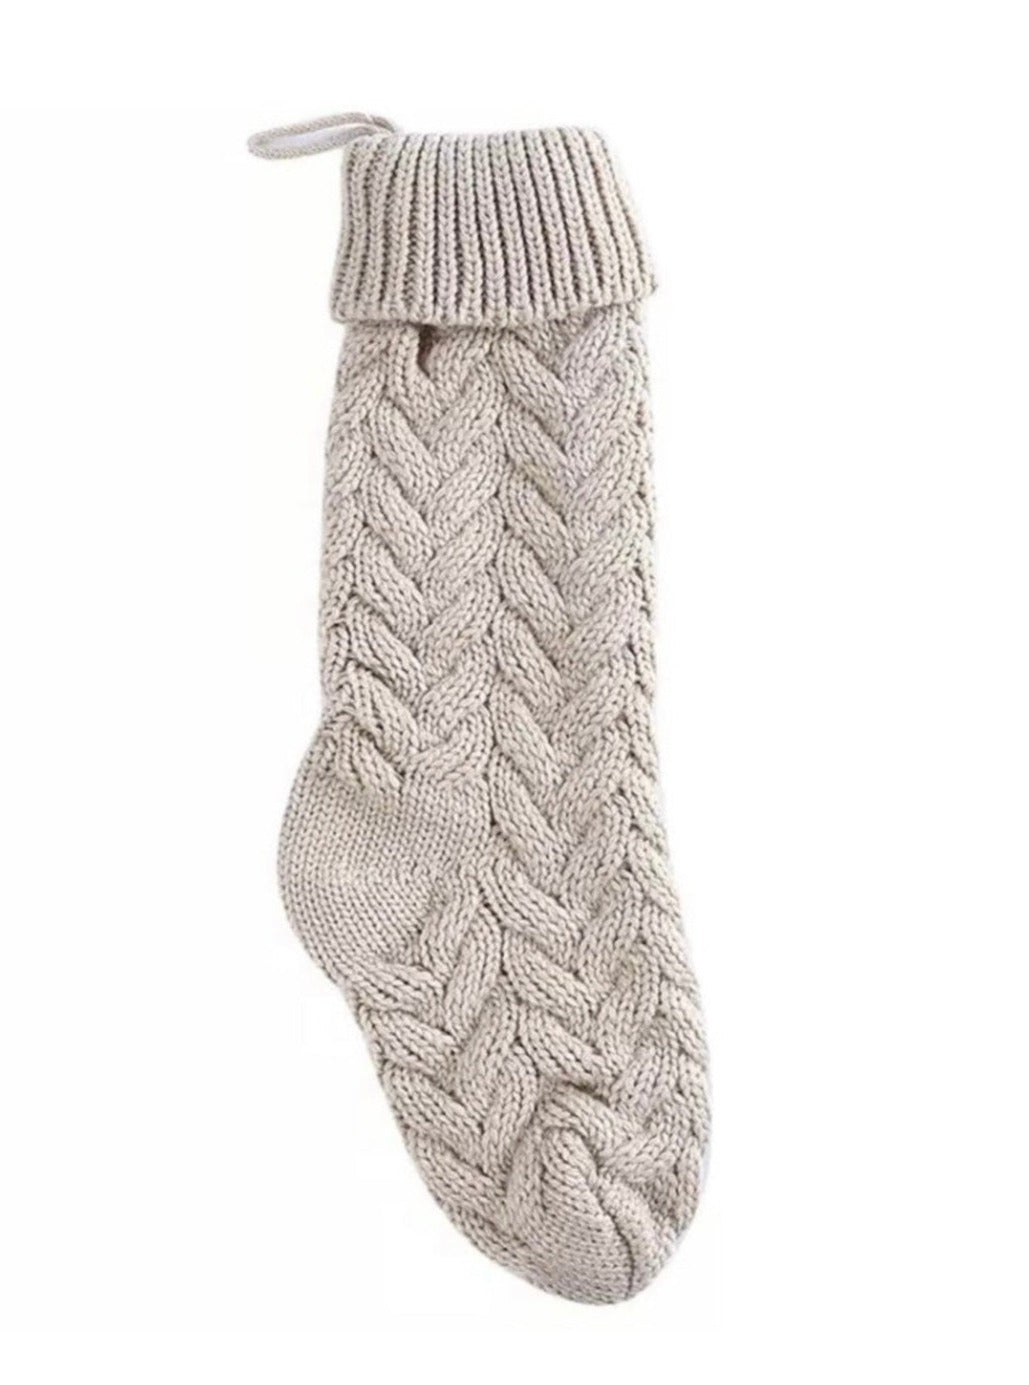 Knitted Stocking - Stone